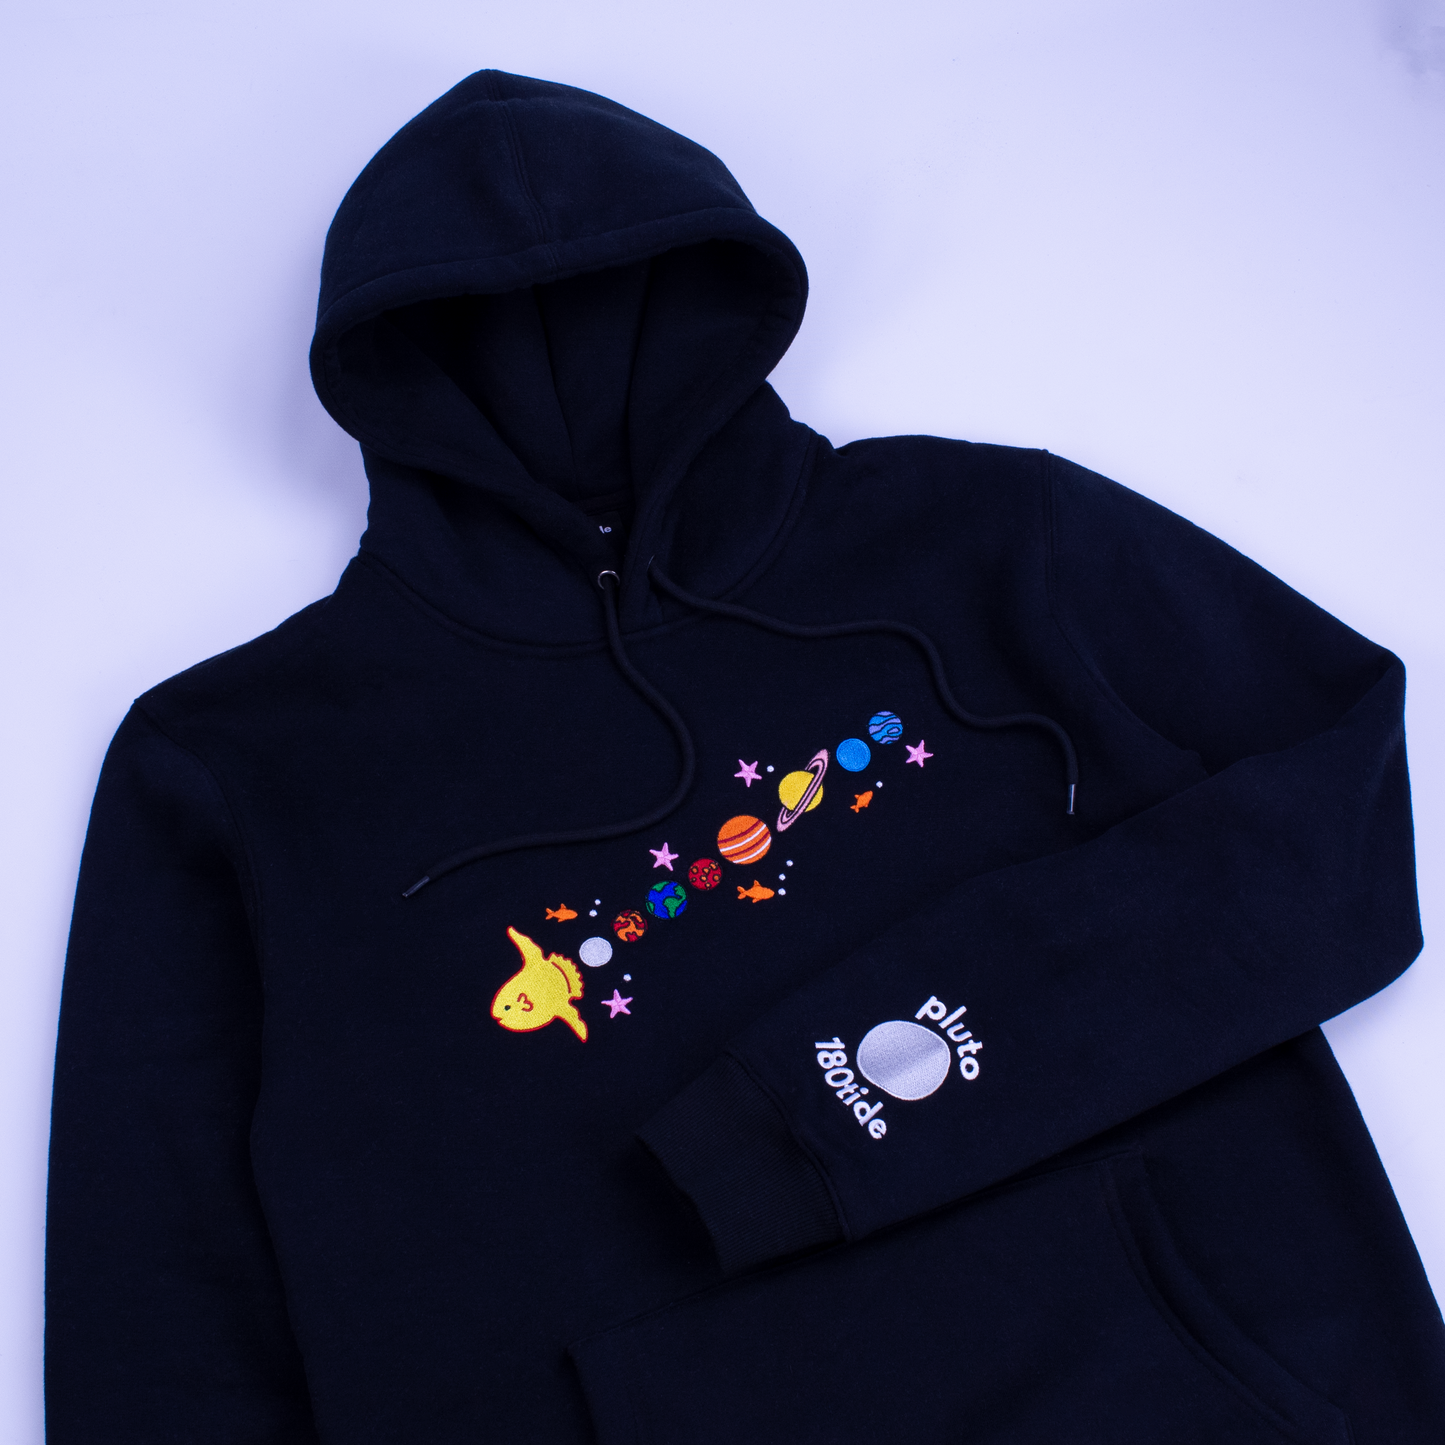 Sunfish Solar System Planets Embroidered Black Hoodie